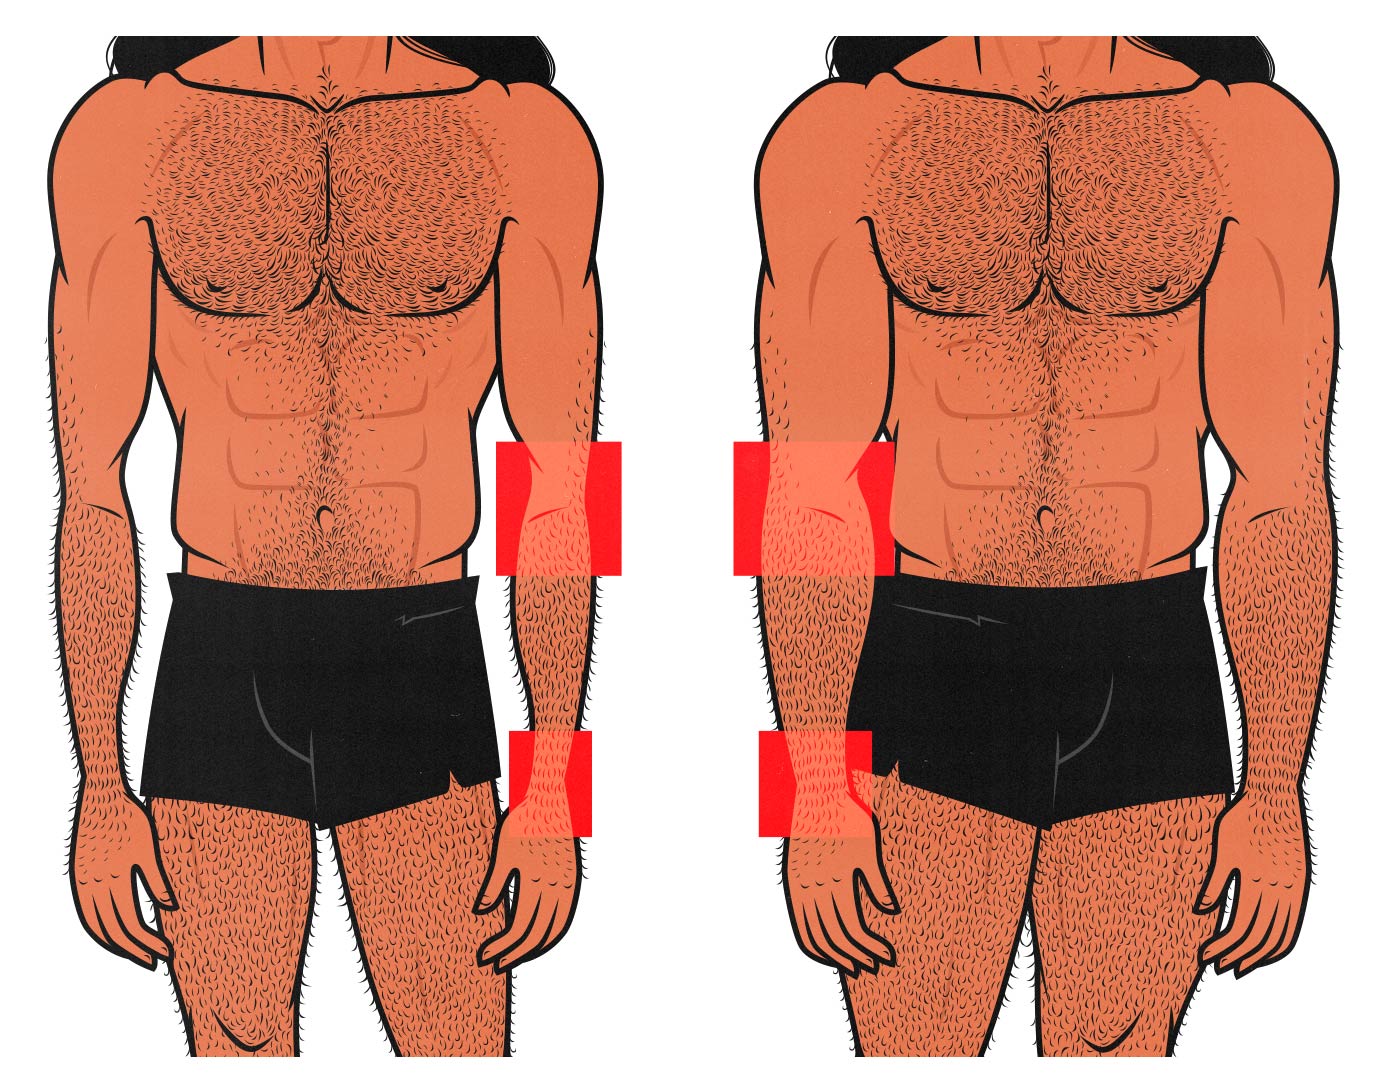 Illustration comparing an easygainer with thick bones against a hardgainer with thin bones.